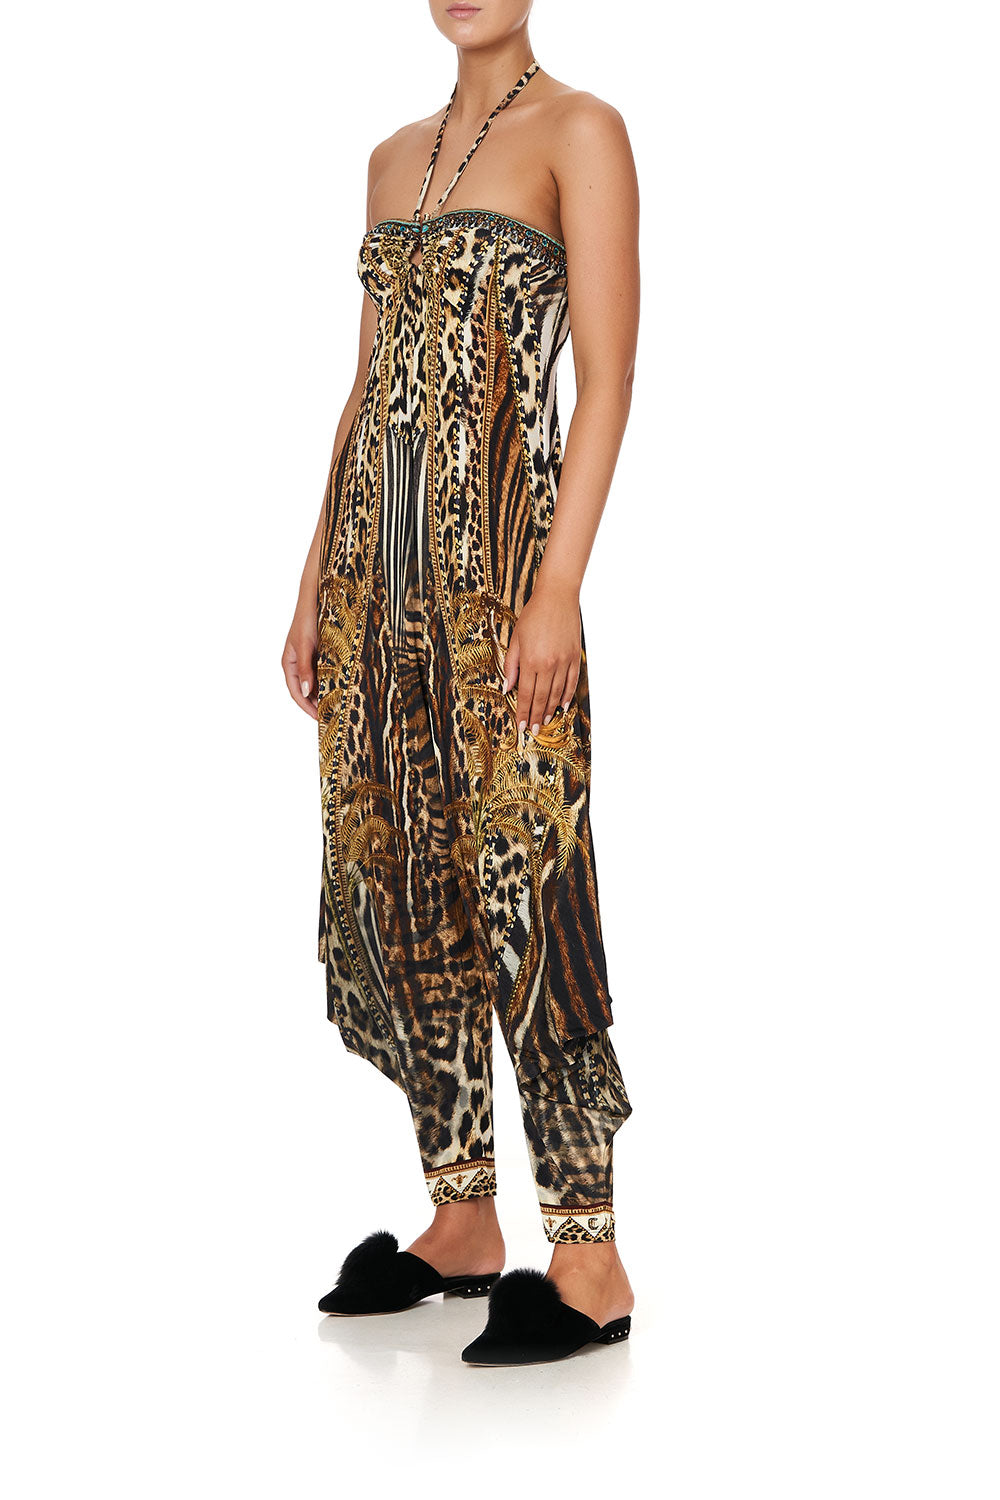 DRAPED PANT JUMPSUIT WITH HARDWARE BERKELEY ST AFTER DARK